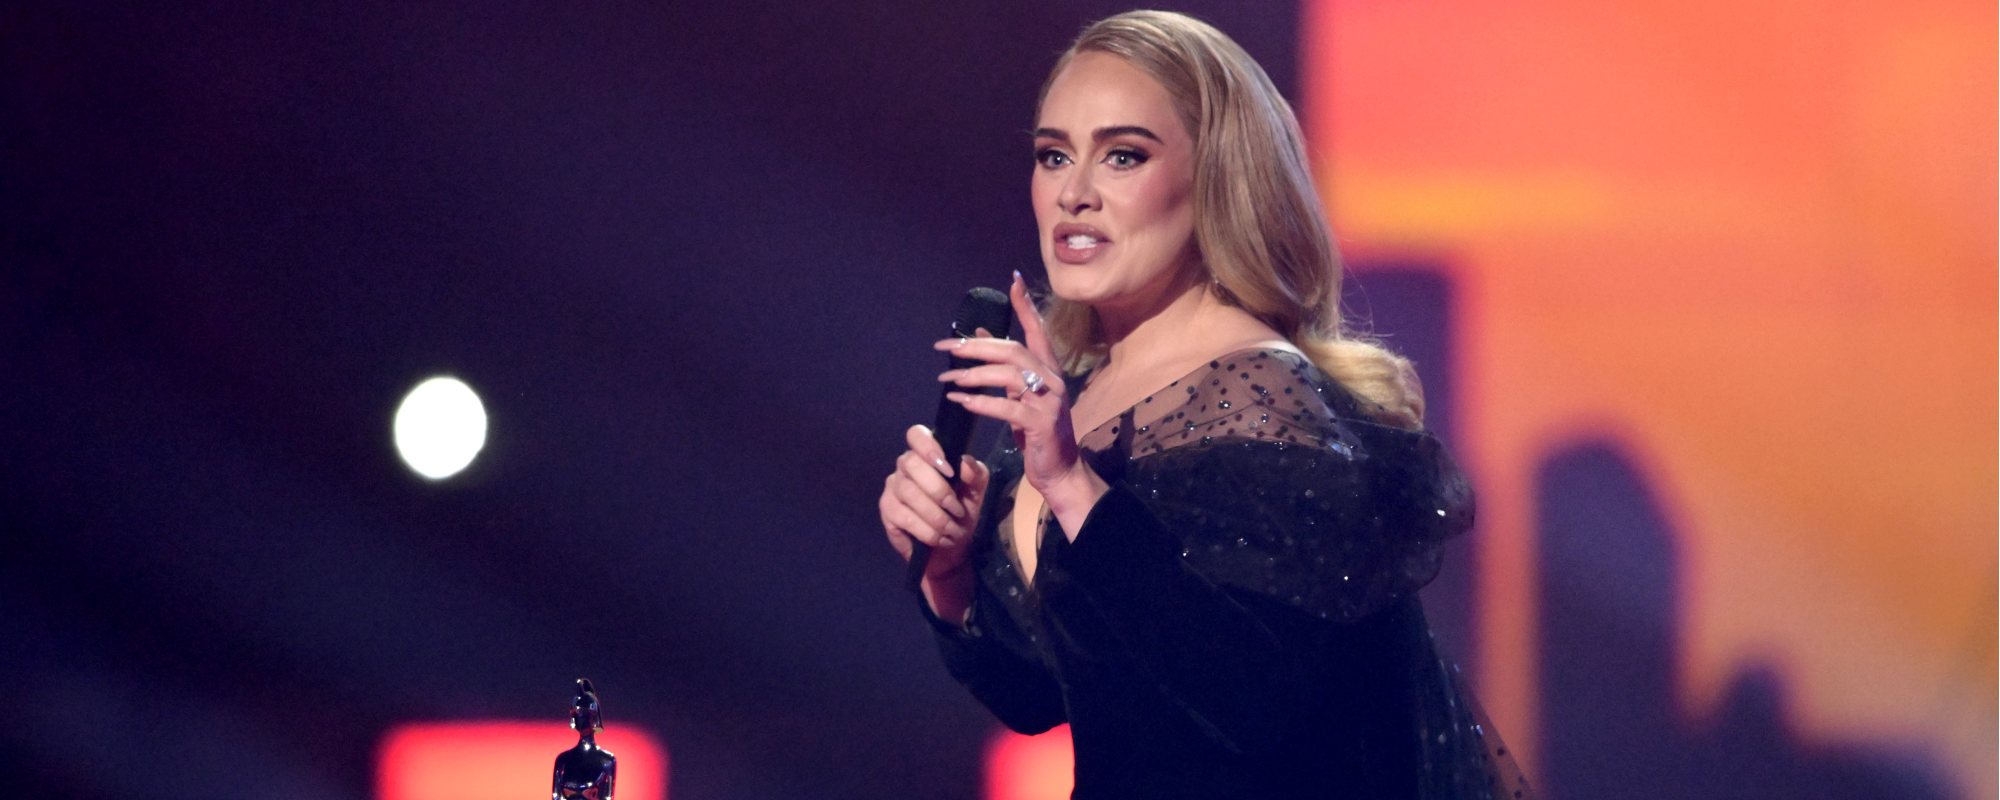 Adele Opens Up on Parenthood and Fame: “The Kids Don’t Give a Flying F*** Who I Am”